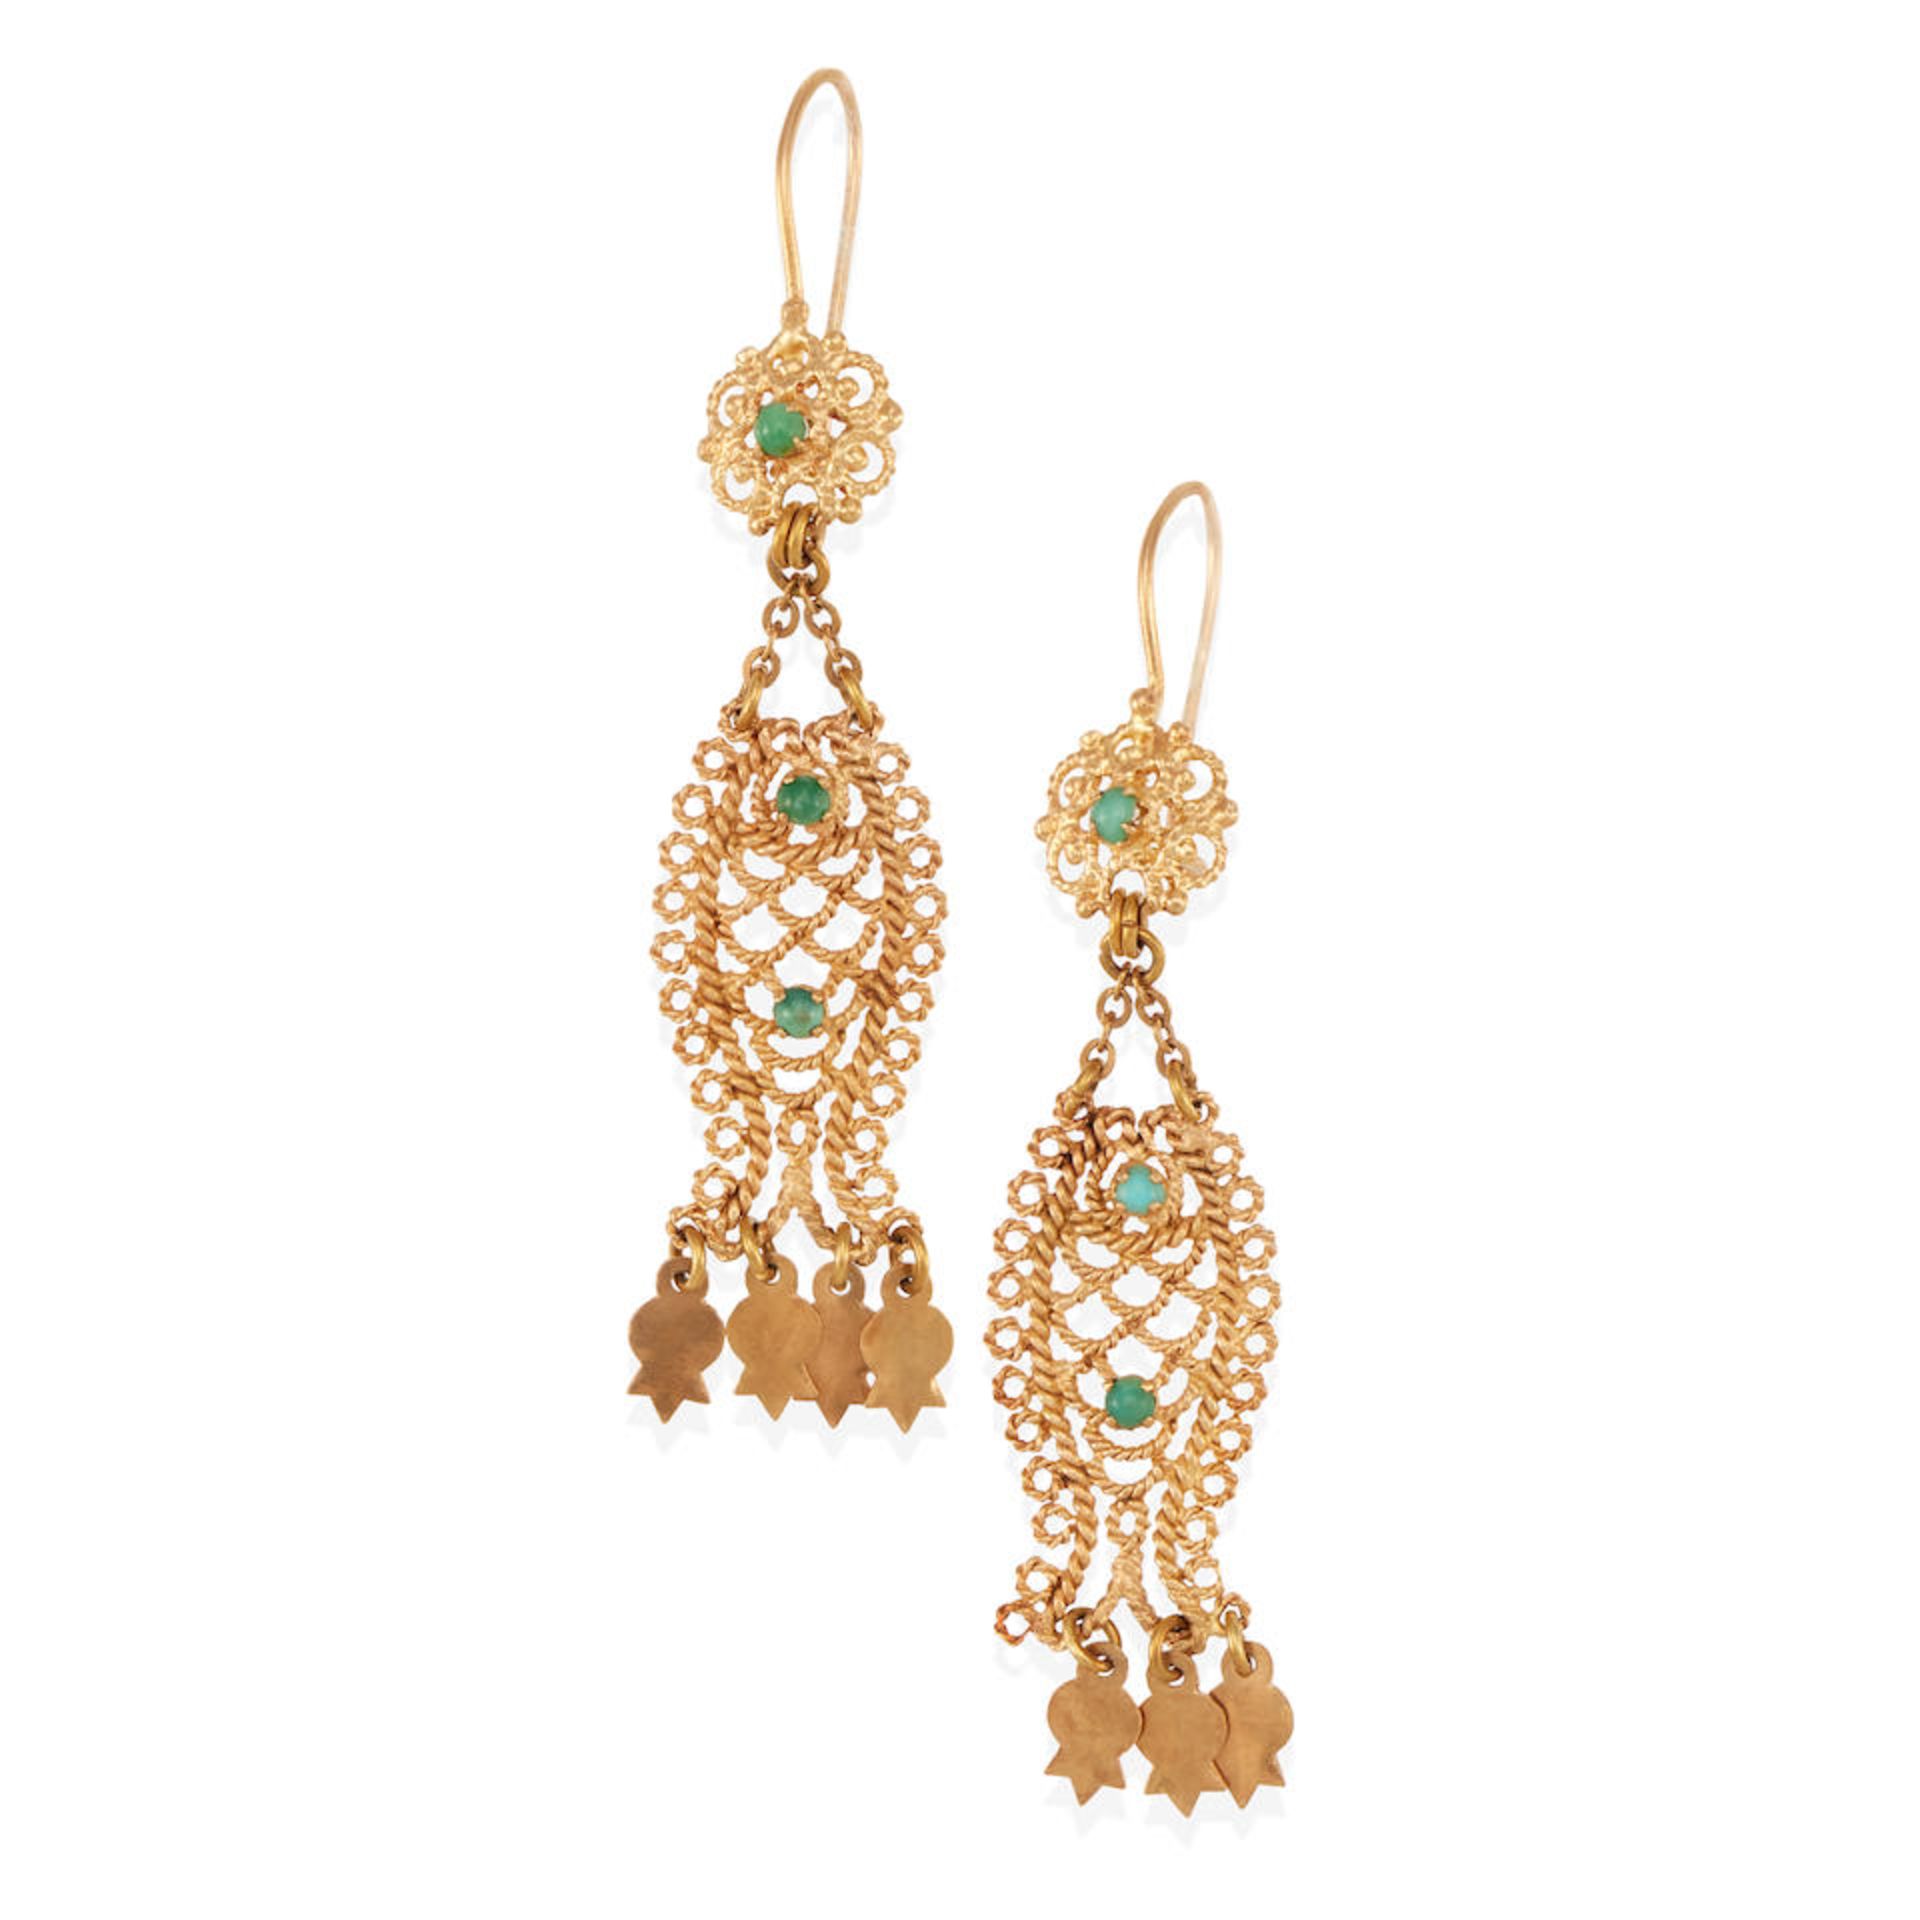 A PAIR OF 18K GOLD AND TURQUOISE FILLIGREE EARRINGS